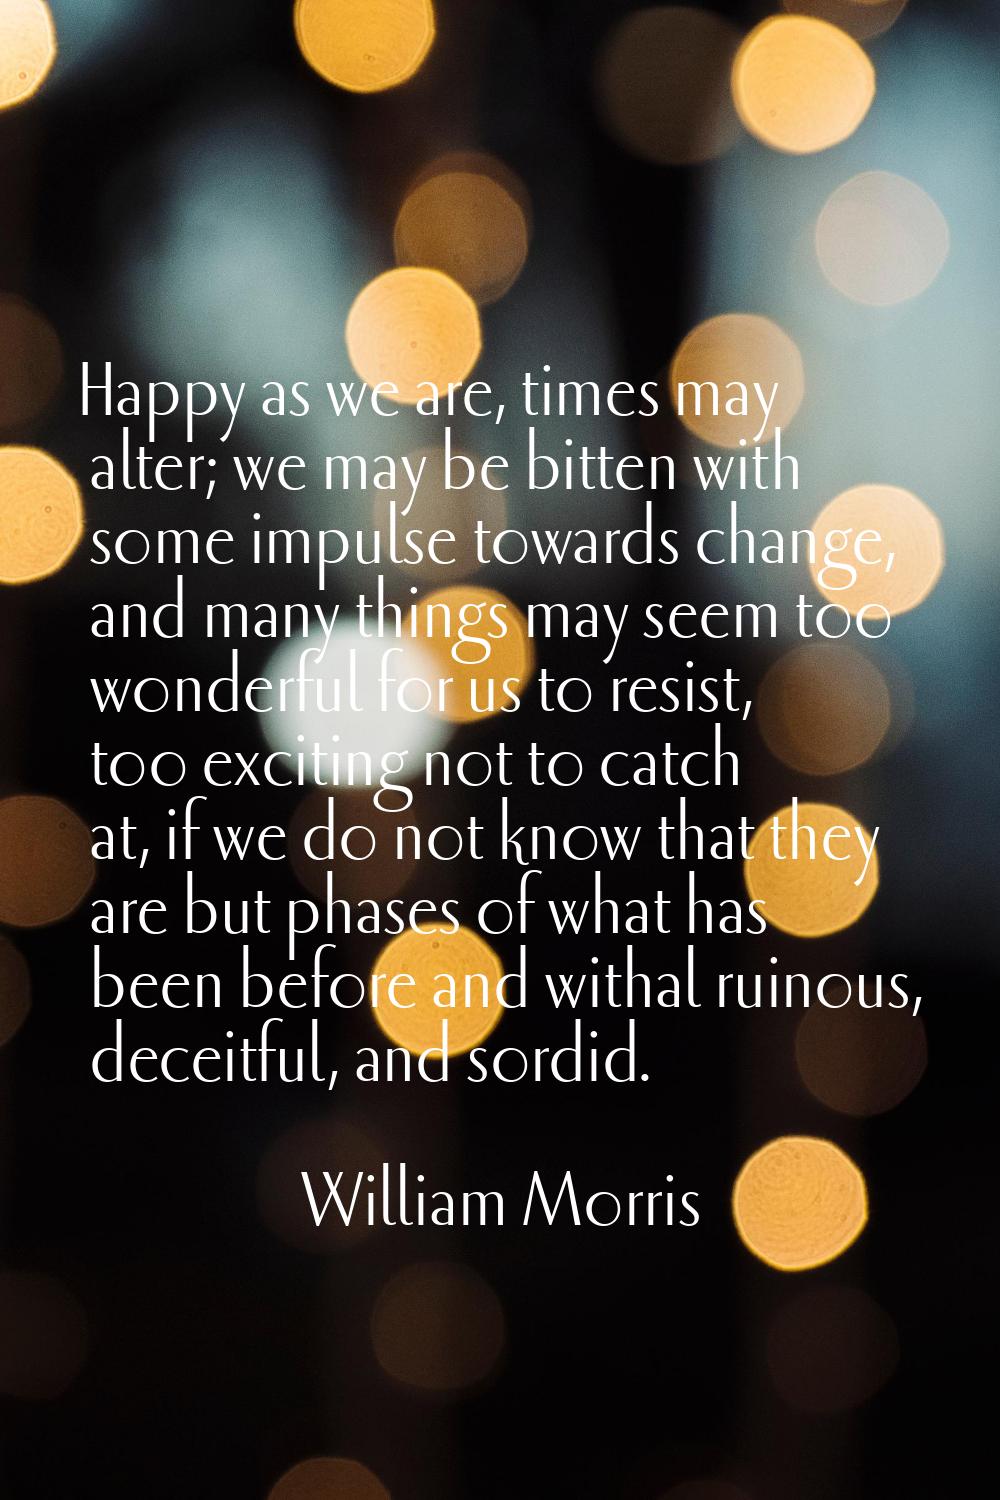 Happy as we are, times may alter; we may be bitten with some impulse towards change, and many thing